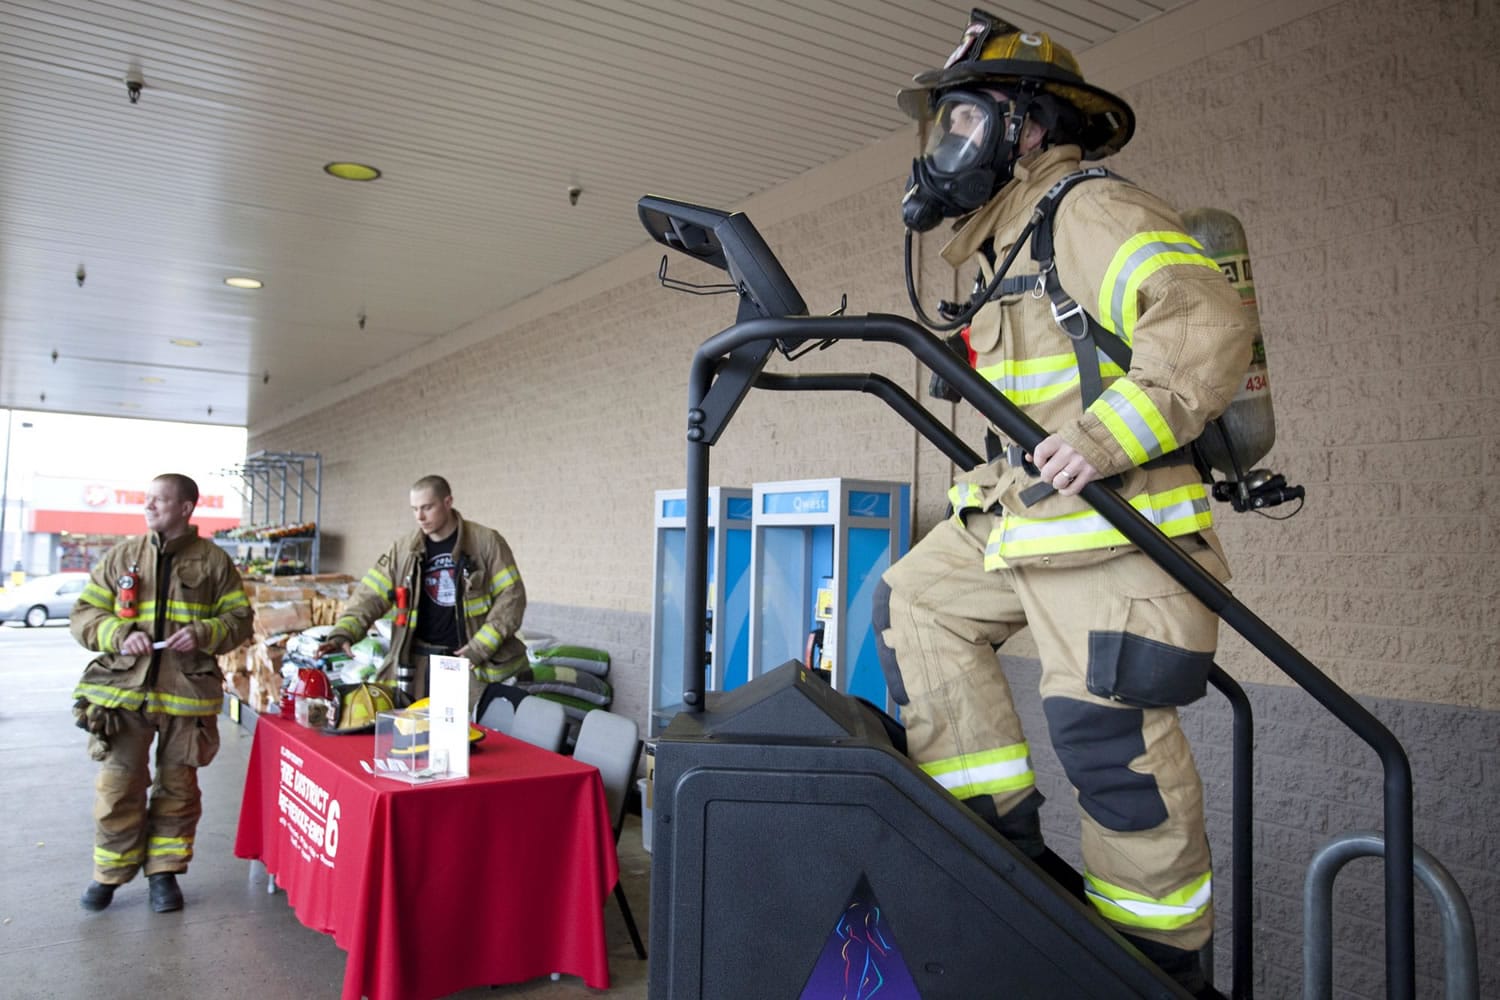 Photos by Vivian Johnson/ for The Columbian
Scott Squires, who fought and beat lymphoma in the past decade, rides a StairMaster outside the Hazel Dell Fred Meyer to raise money and awareness for the Lymphoma &amp; Leukemia Society.  Squires and other firefighters will participate in an annual stair-climb fundraiser in Seattle, as well.